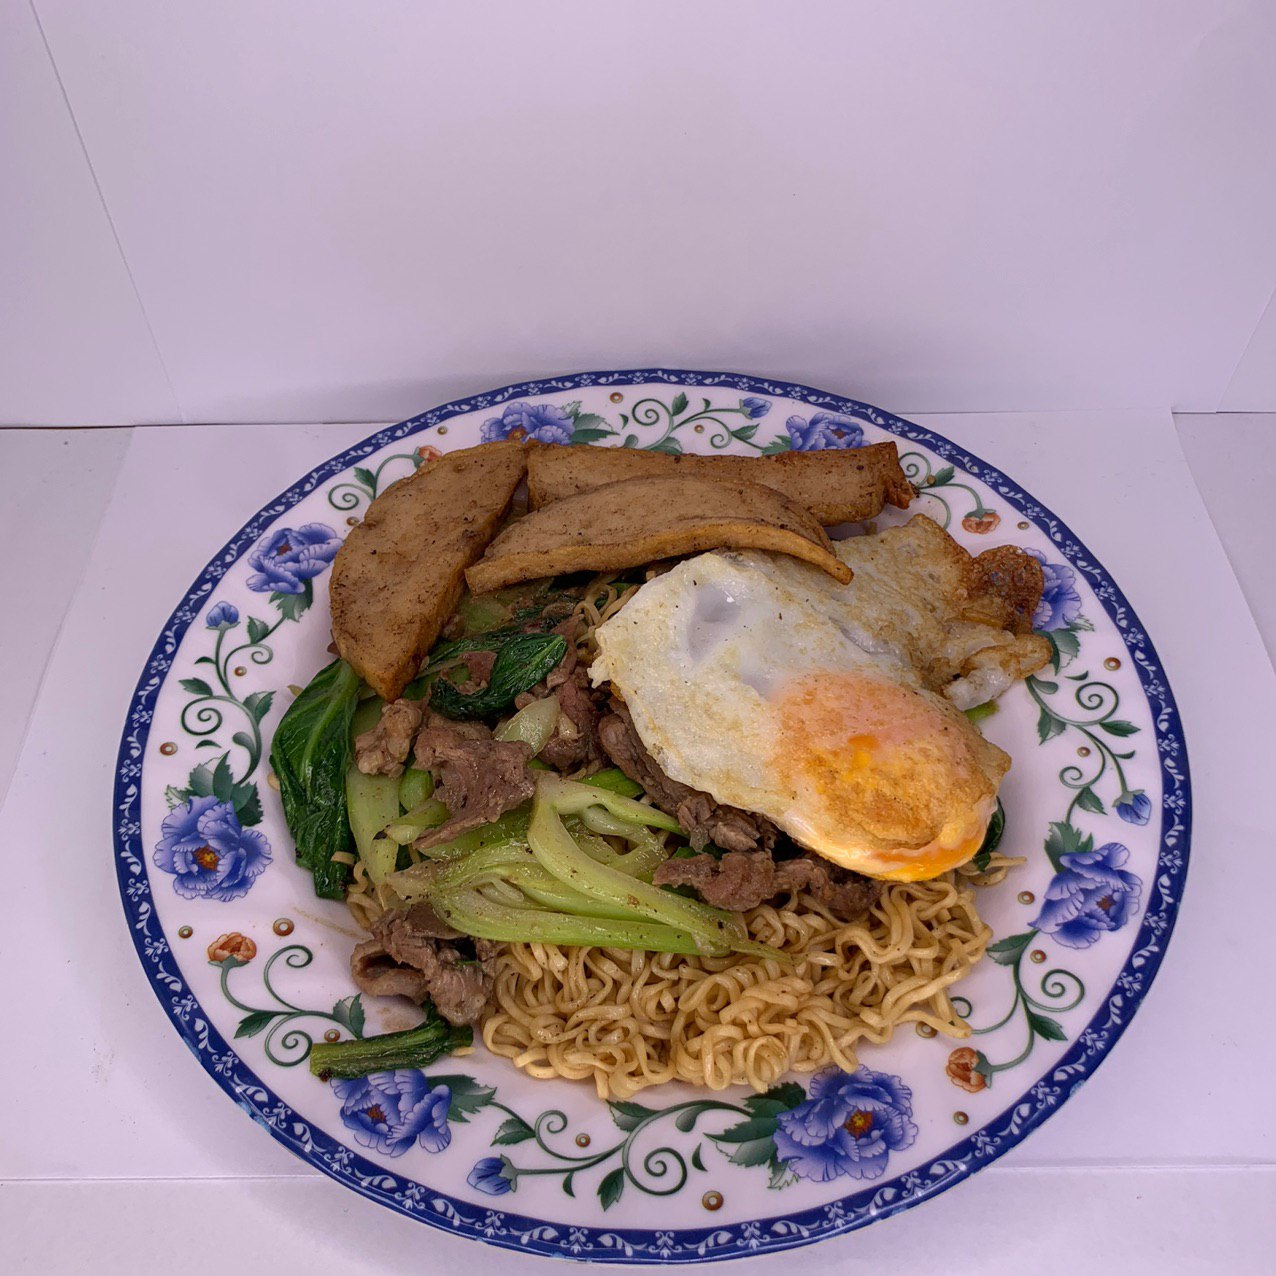 23.Fried Noodle with Pork and Egg